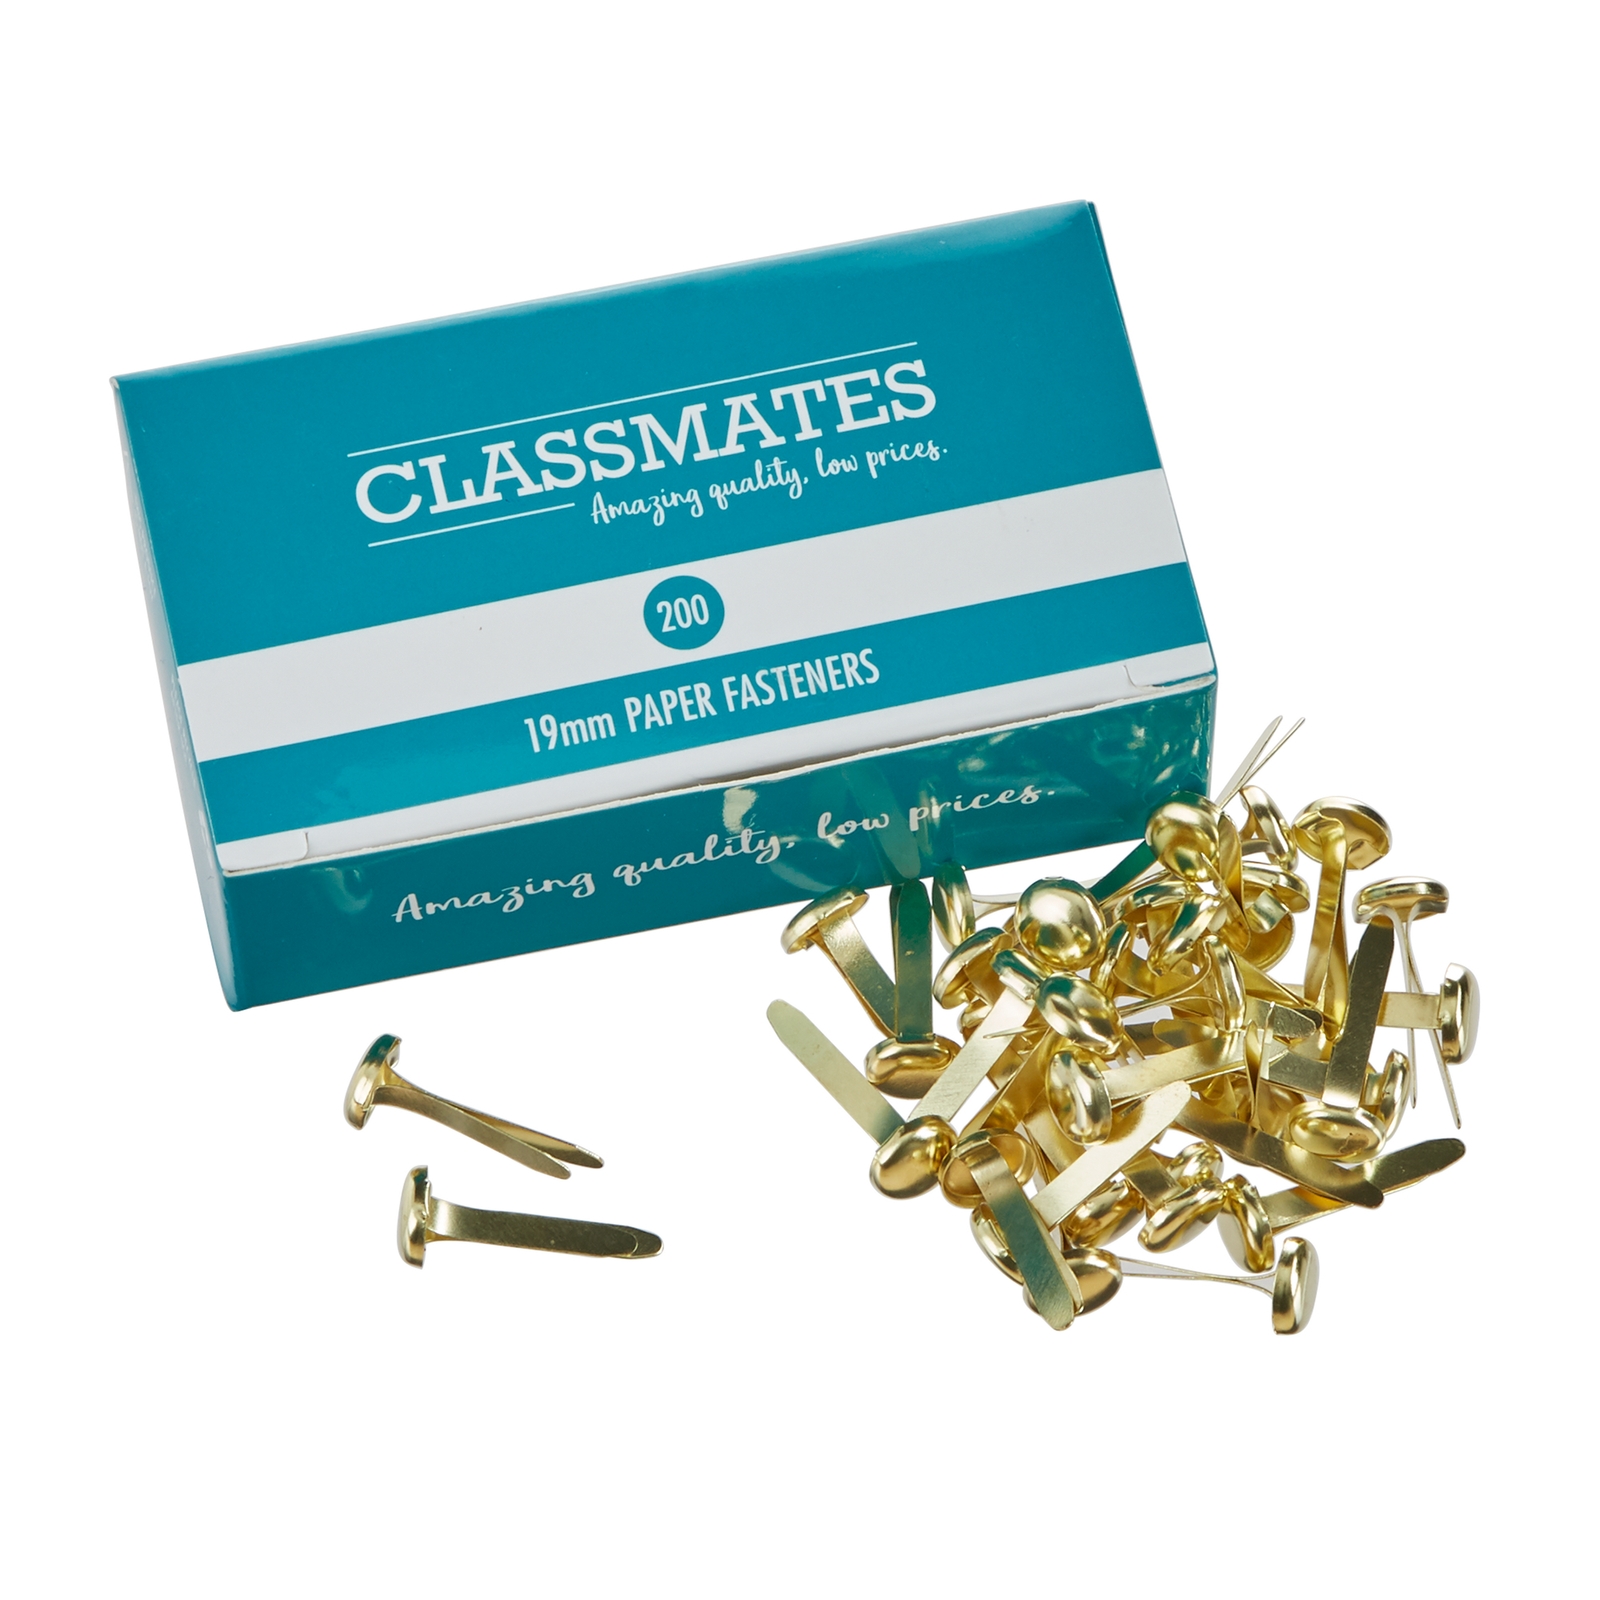 Classmates Paper Fasteners 20mm - Pack of 200